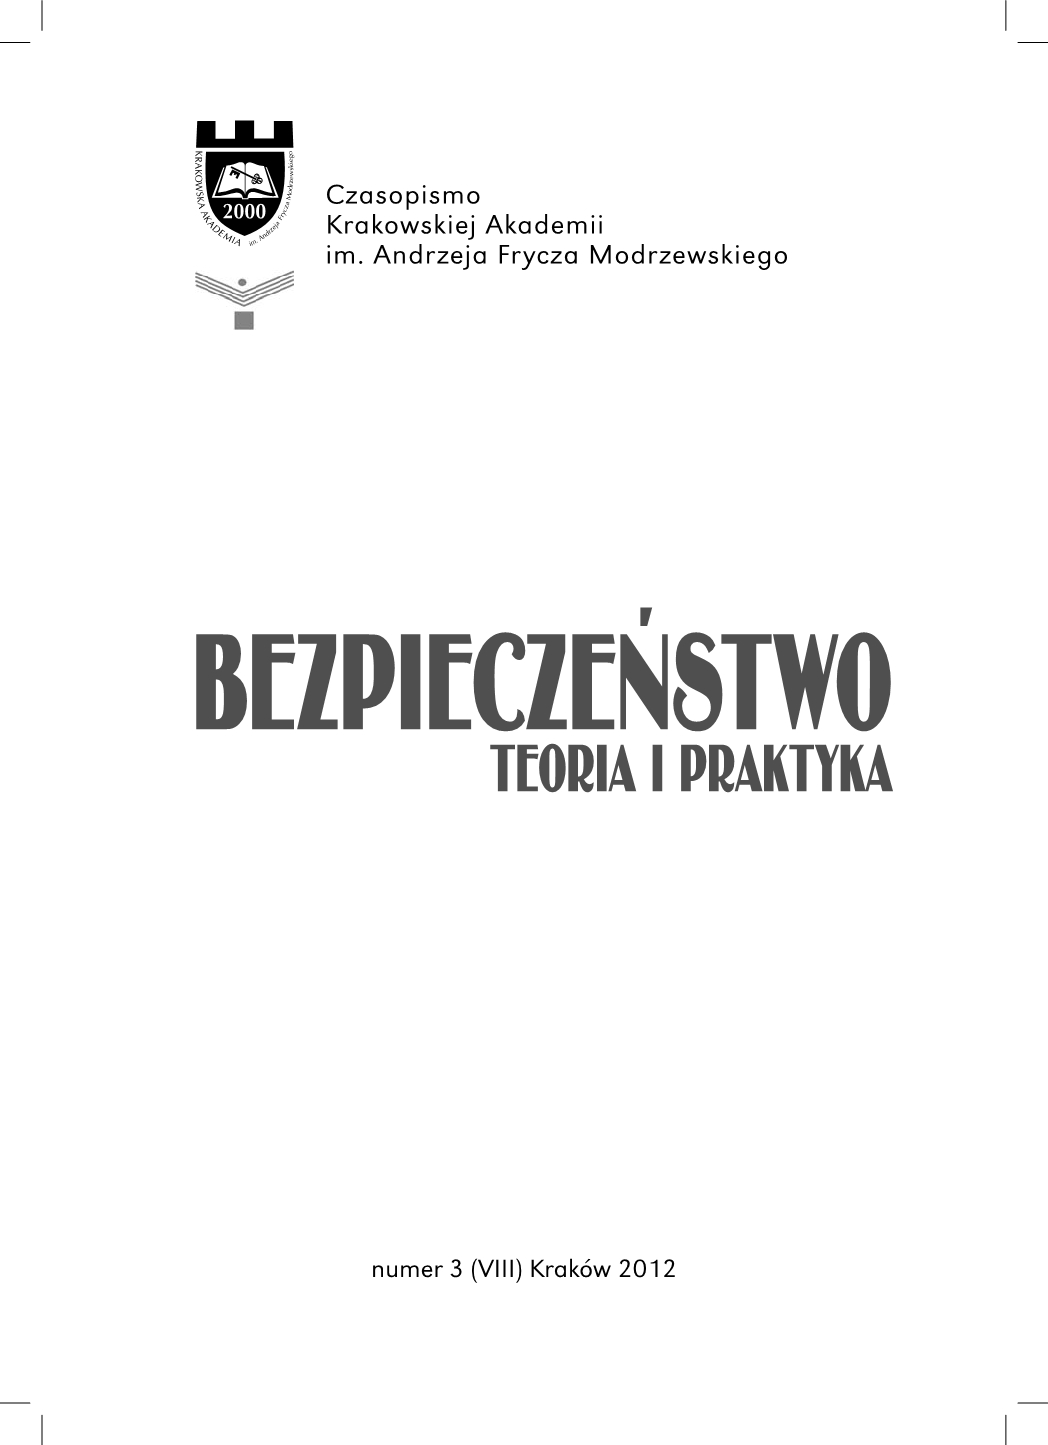 Asymmetrical Wars or Jewgienij Messner’s “miatiezewojna” As a Threat to Security in the 21st Century Cover Image